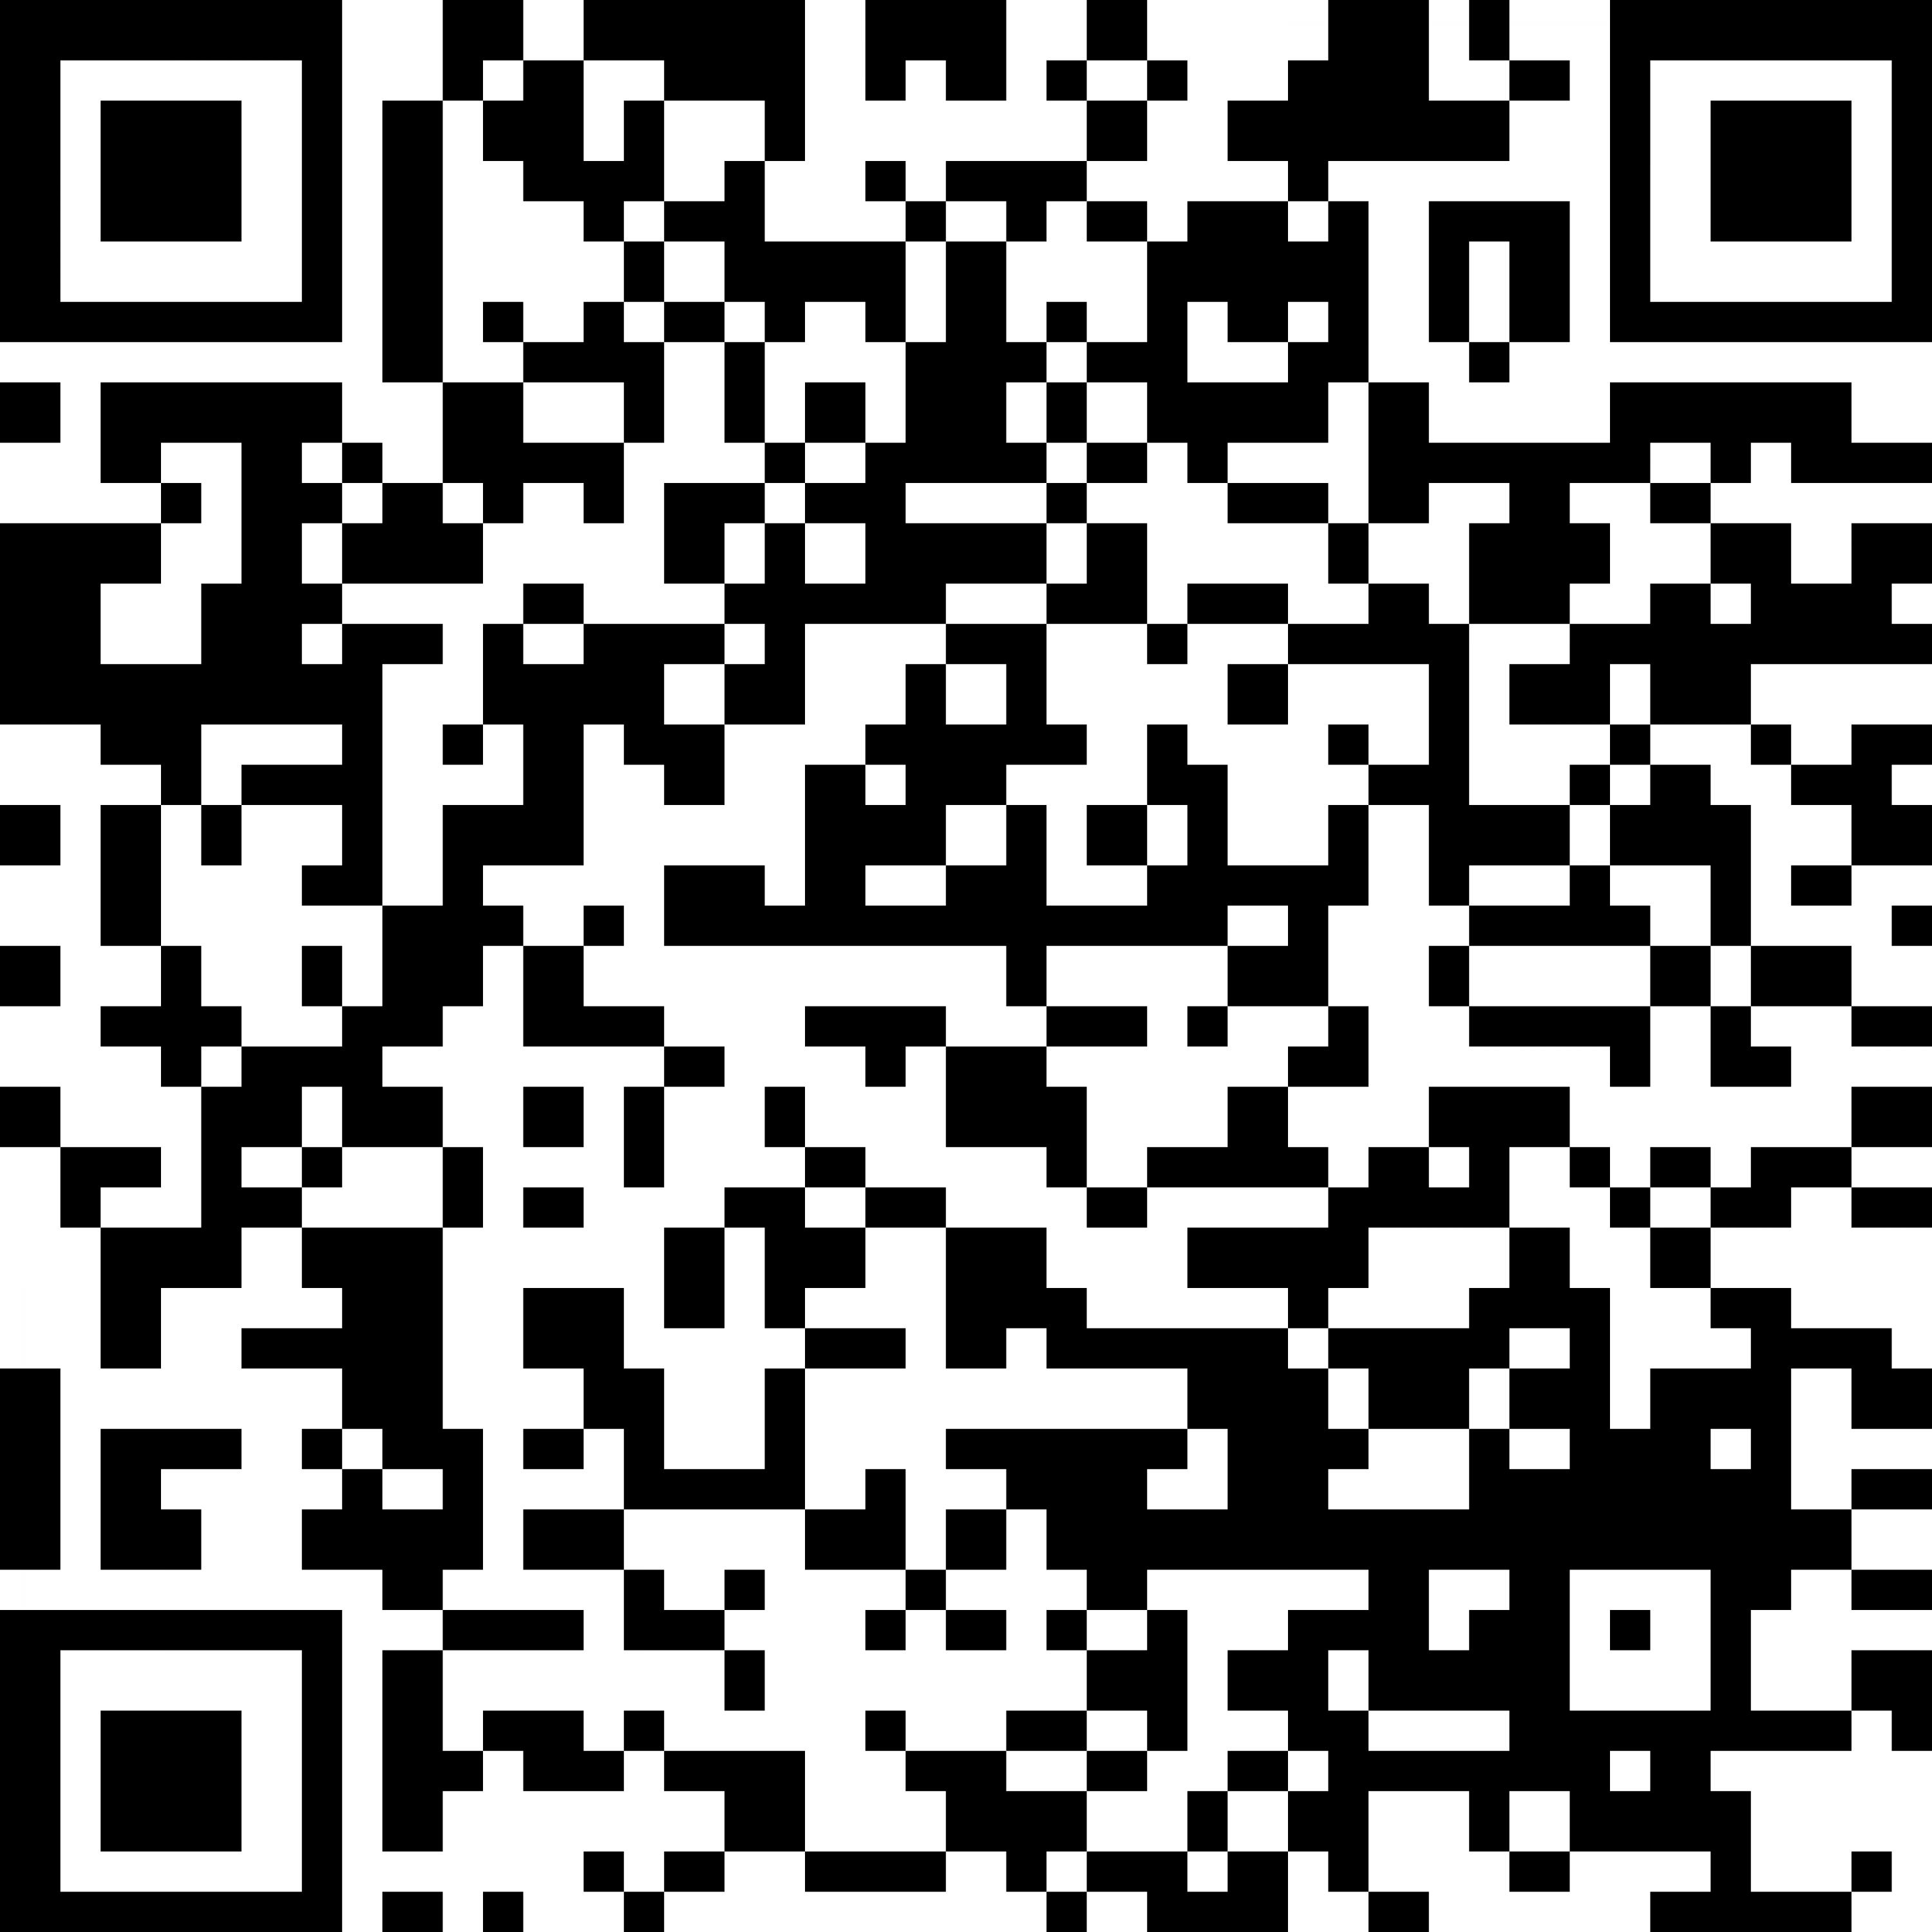 InformaCast sign-in QR Code. Scan with a QR Code reader to access.